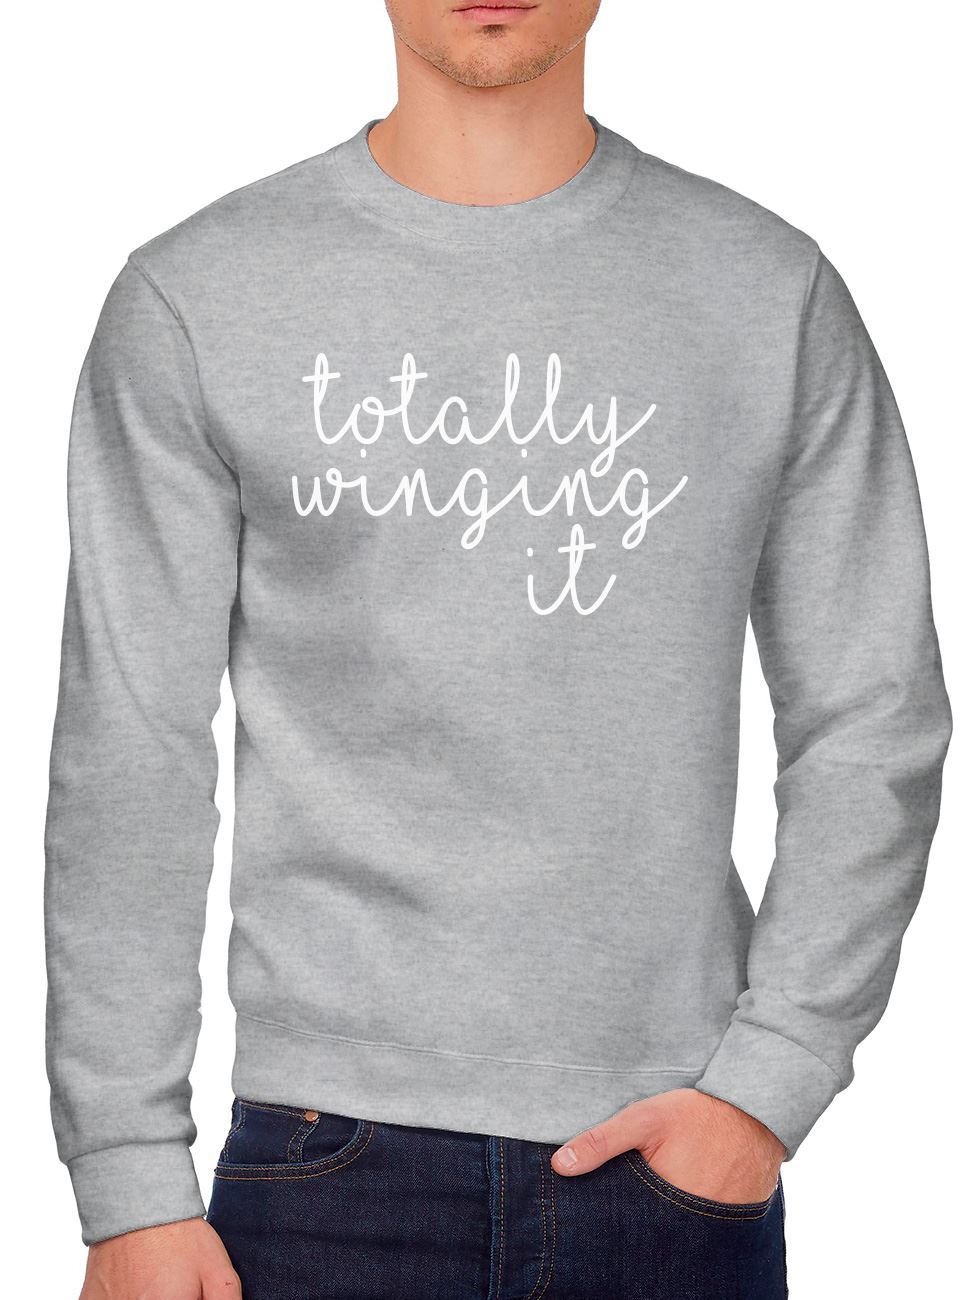 Totally Winging It - Youth & Mens Sweatshirt